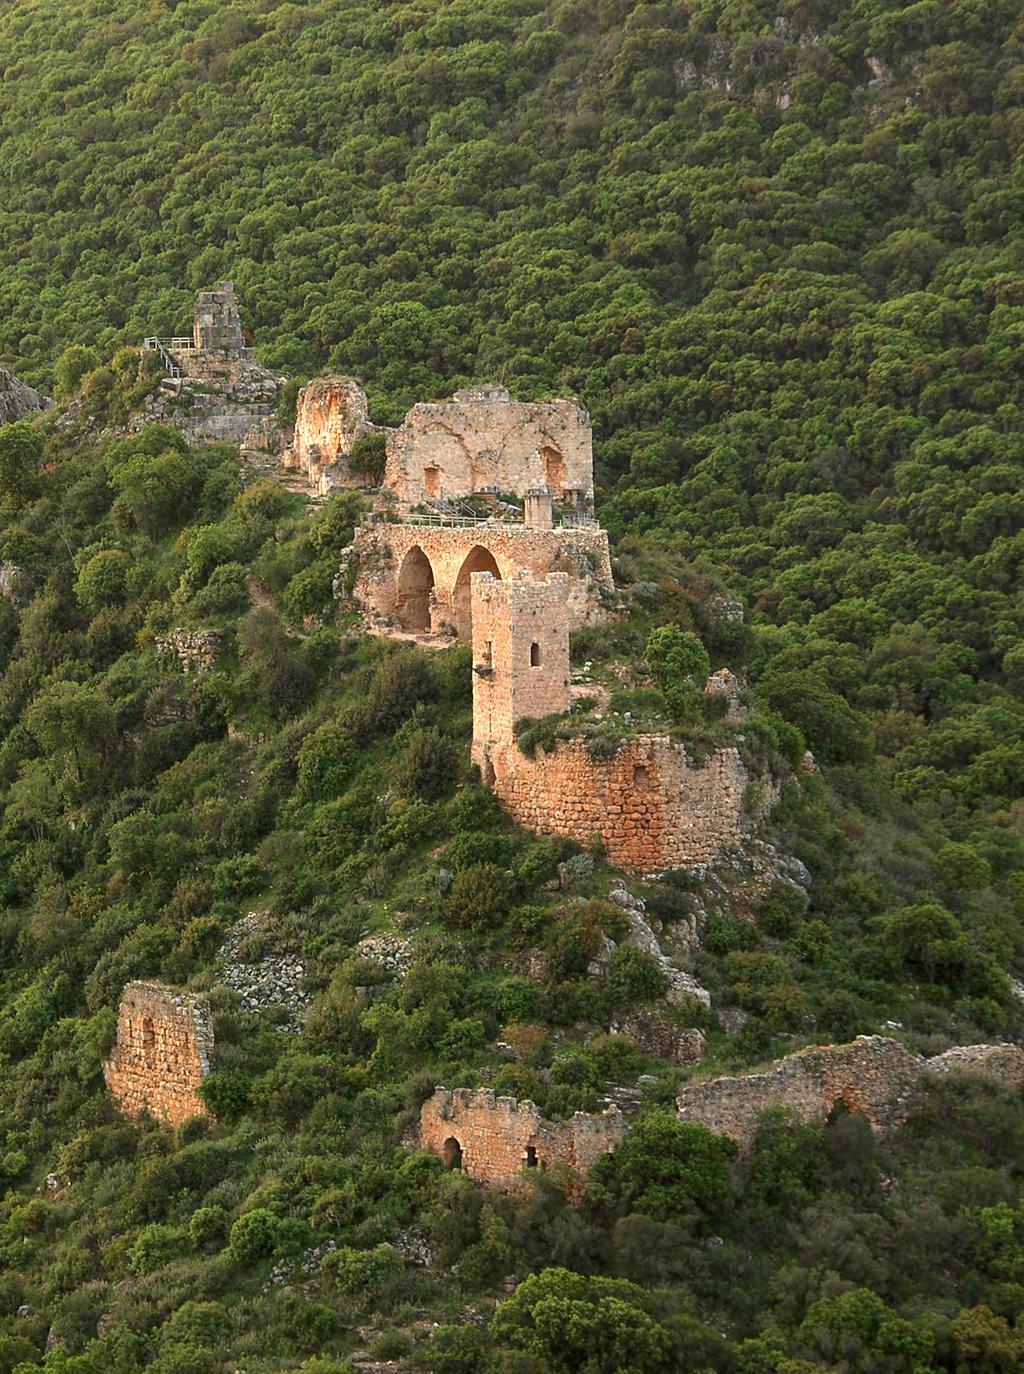 The Montfort is an archaeological site of the Middle Ages, consisting of the ruins of a fortress built by Crusaders during the times of the Kingdom of Jerusalem.